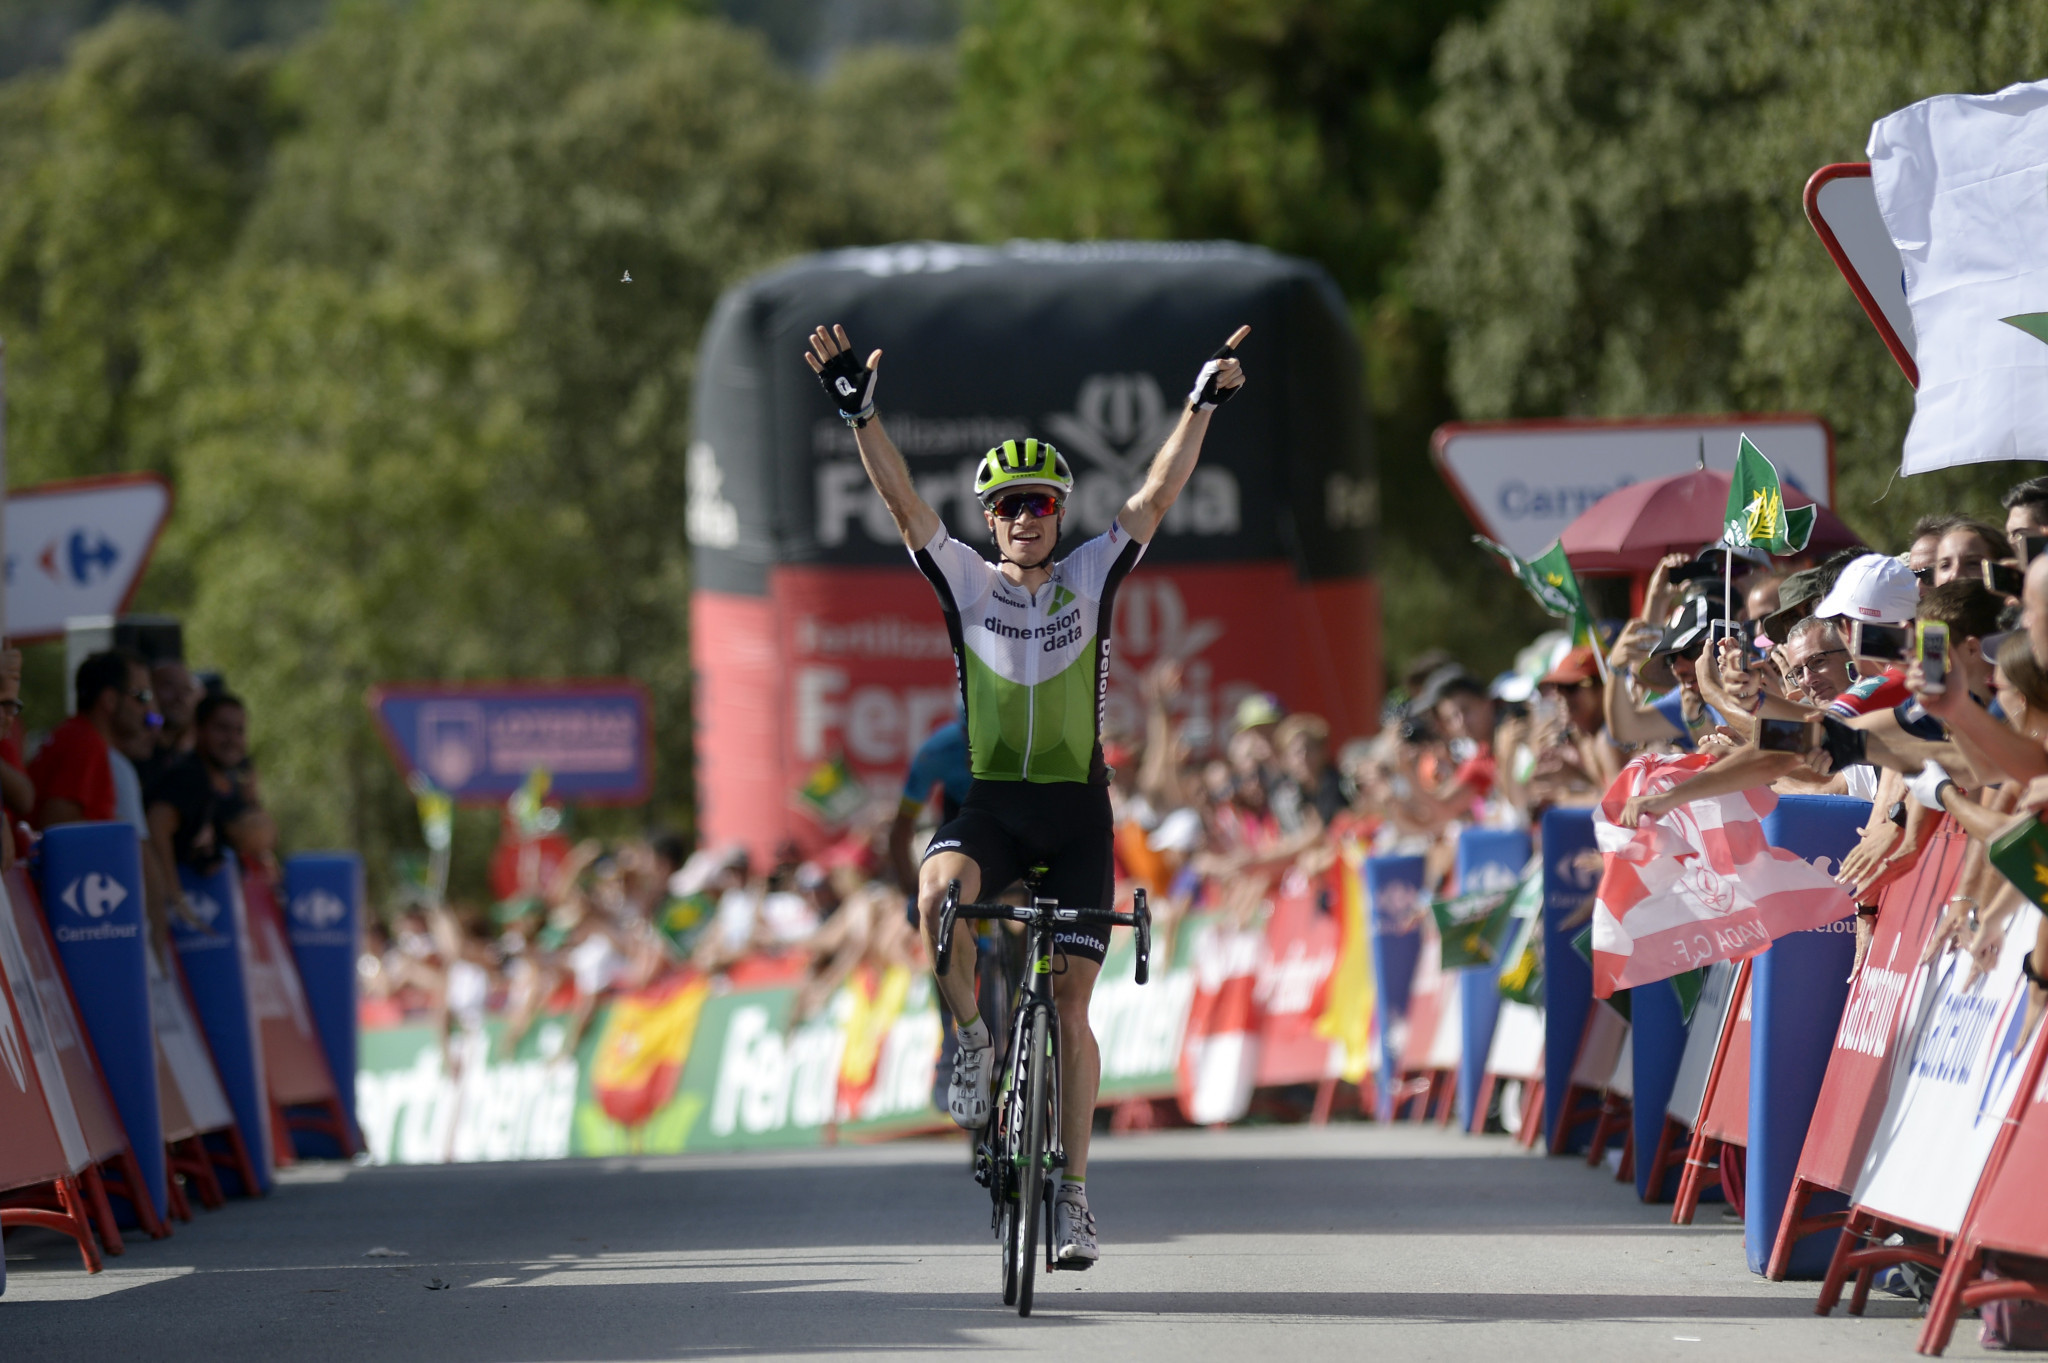 King wins from breakaway group on first mountain stage at Vuelta a España